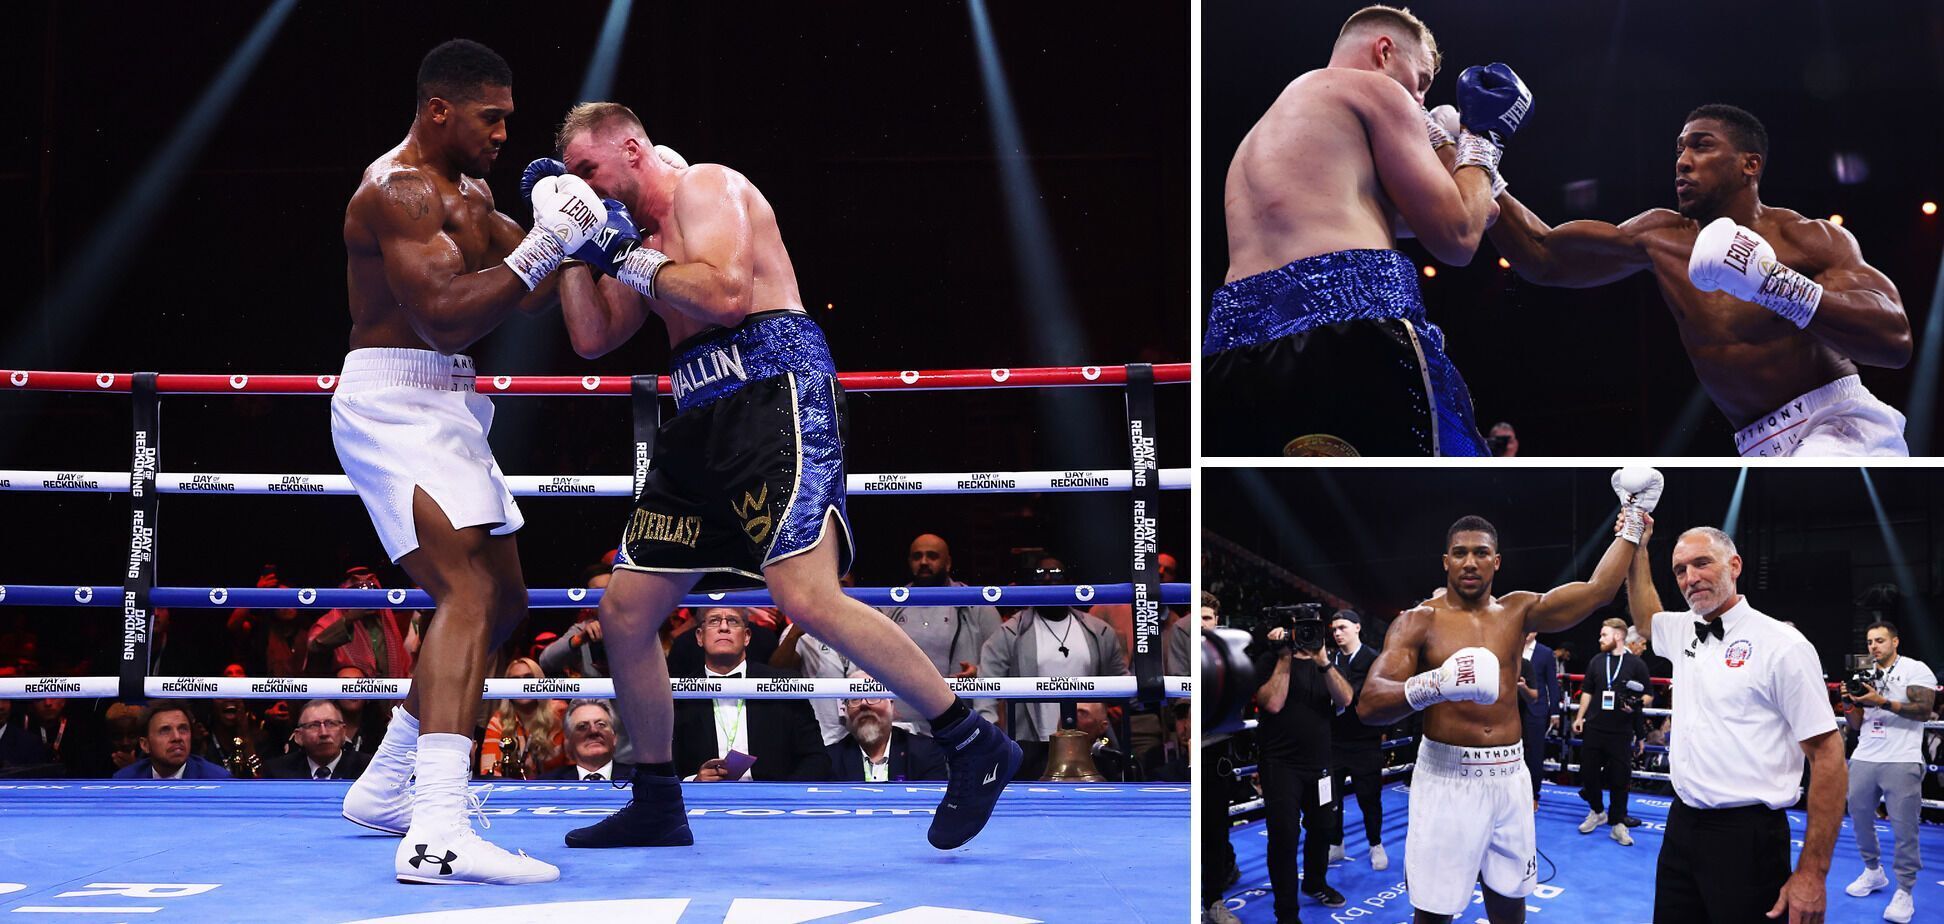 ''Ruined all my plans''. Hearn is shocked by what happened at a boxing event in Riyadh